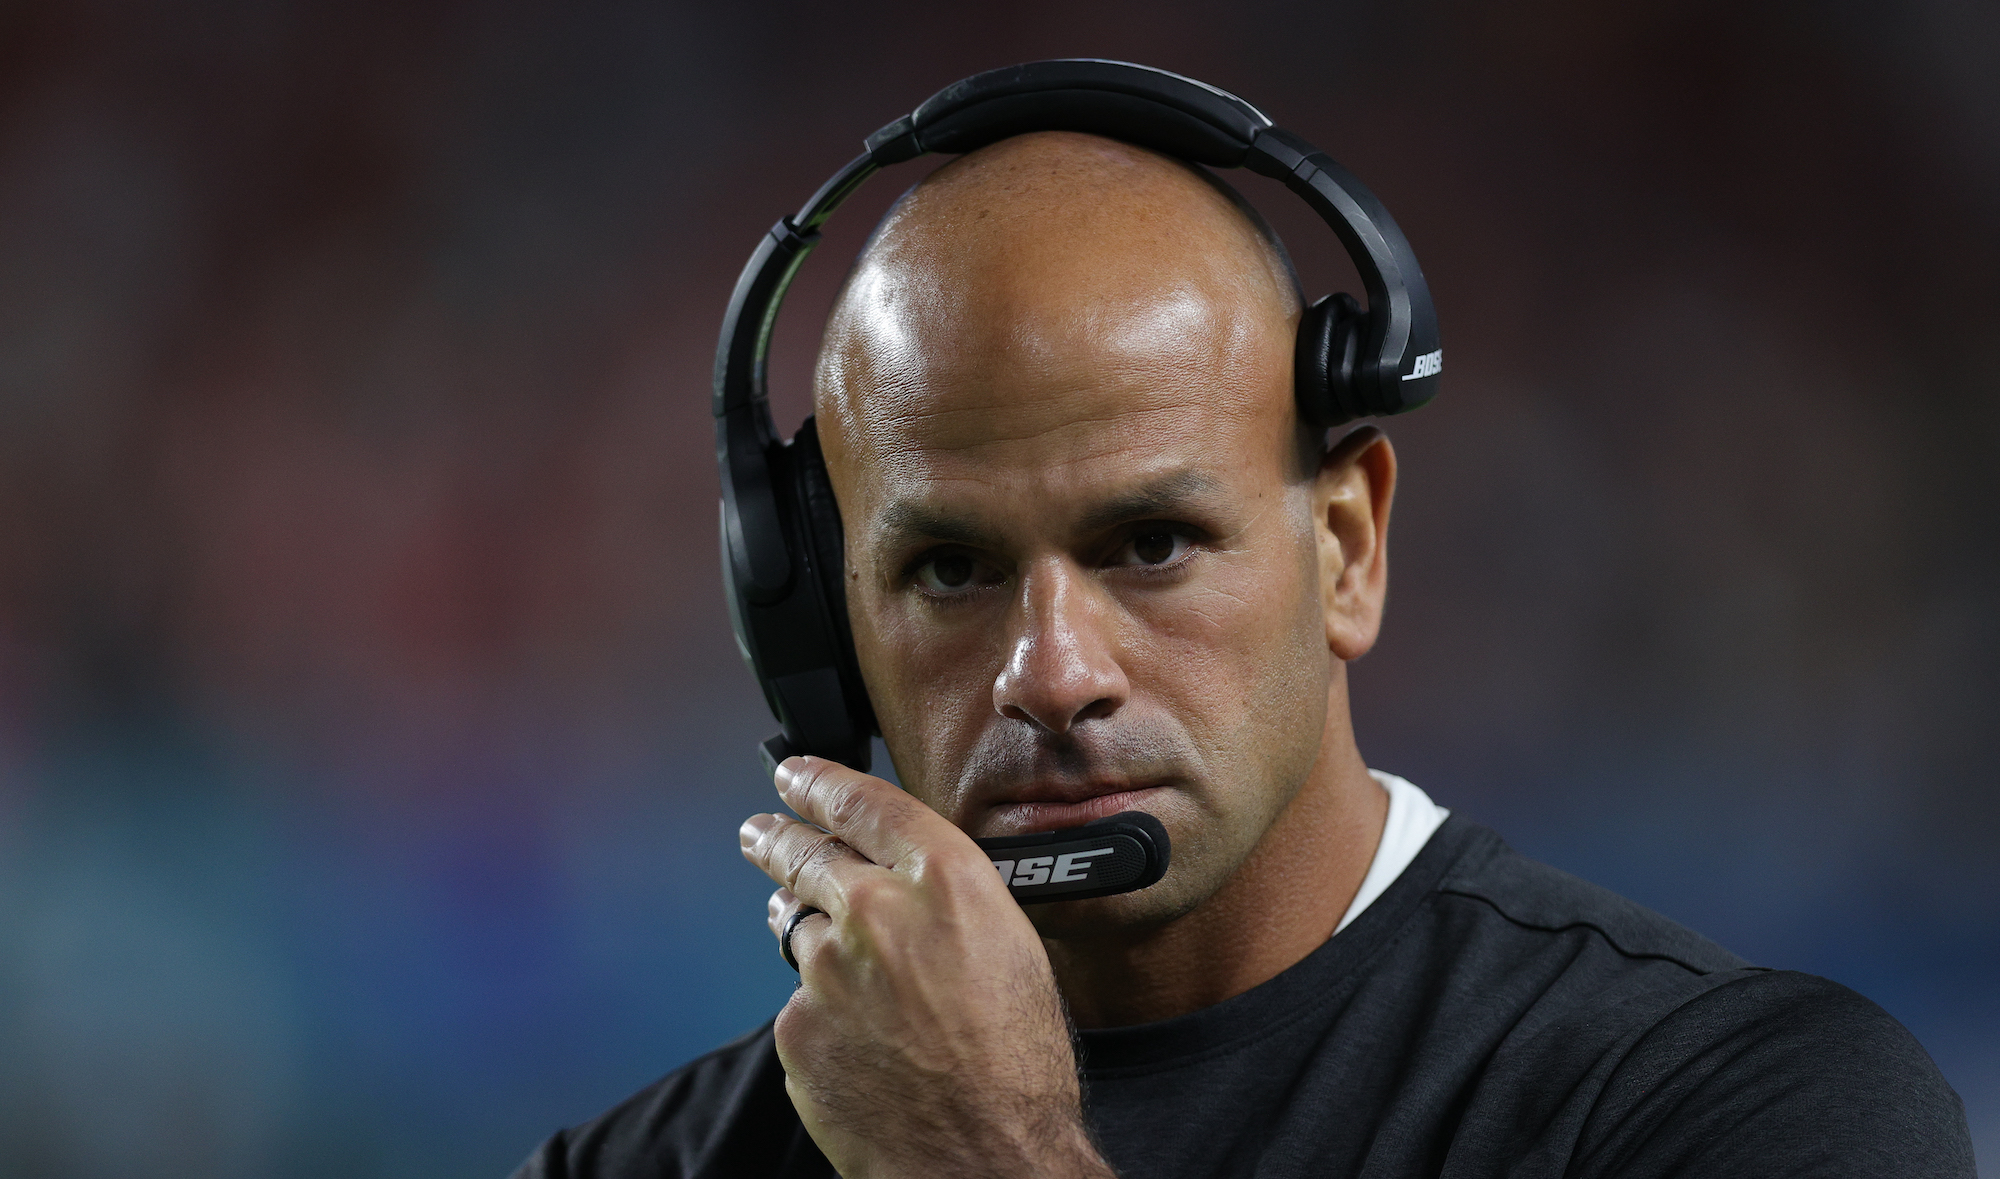 MIAMI, FLORIDA - FEBRUARY 02: Defensive coordinator Robert Saleh of the San Francisco 49ers looks on against the Kansas City Chiefs during the fourth quarter in Super Bowl LIV at Hard Rock Stadium on February 02, 2020 in Miami, Florida. (Photo by Tom Pennington/Getty Images)